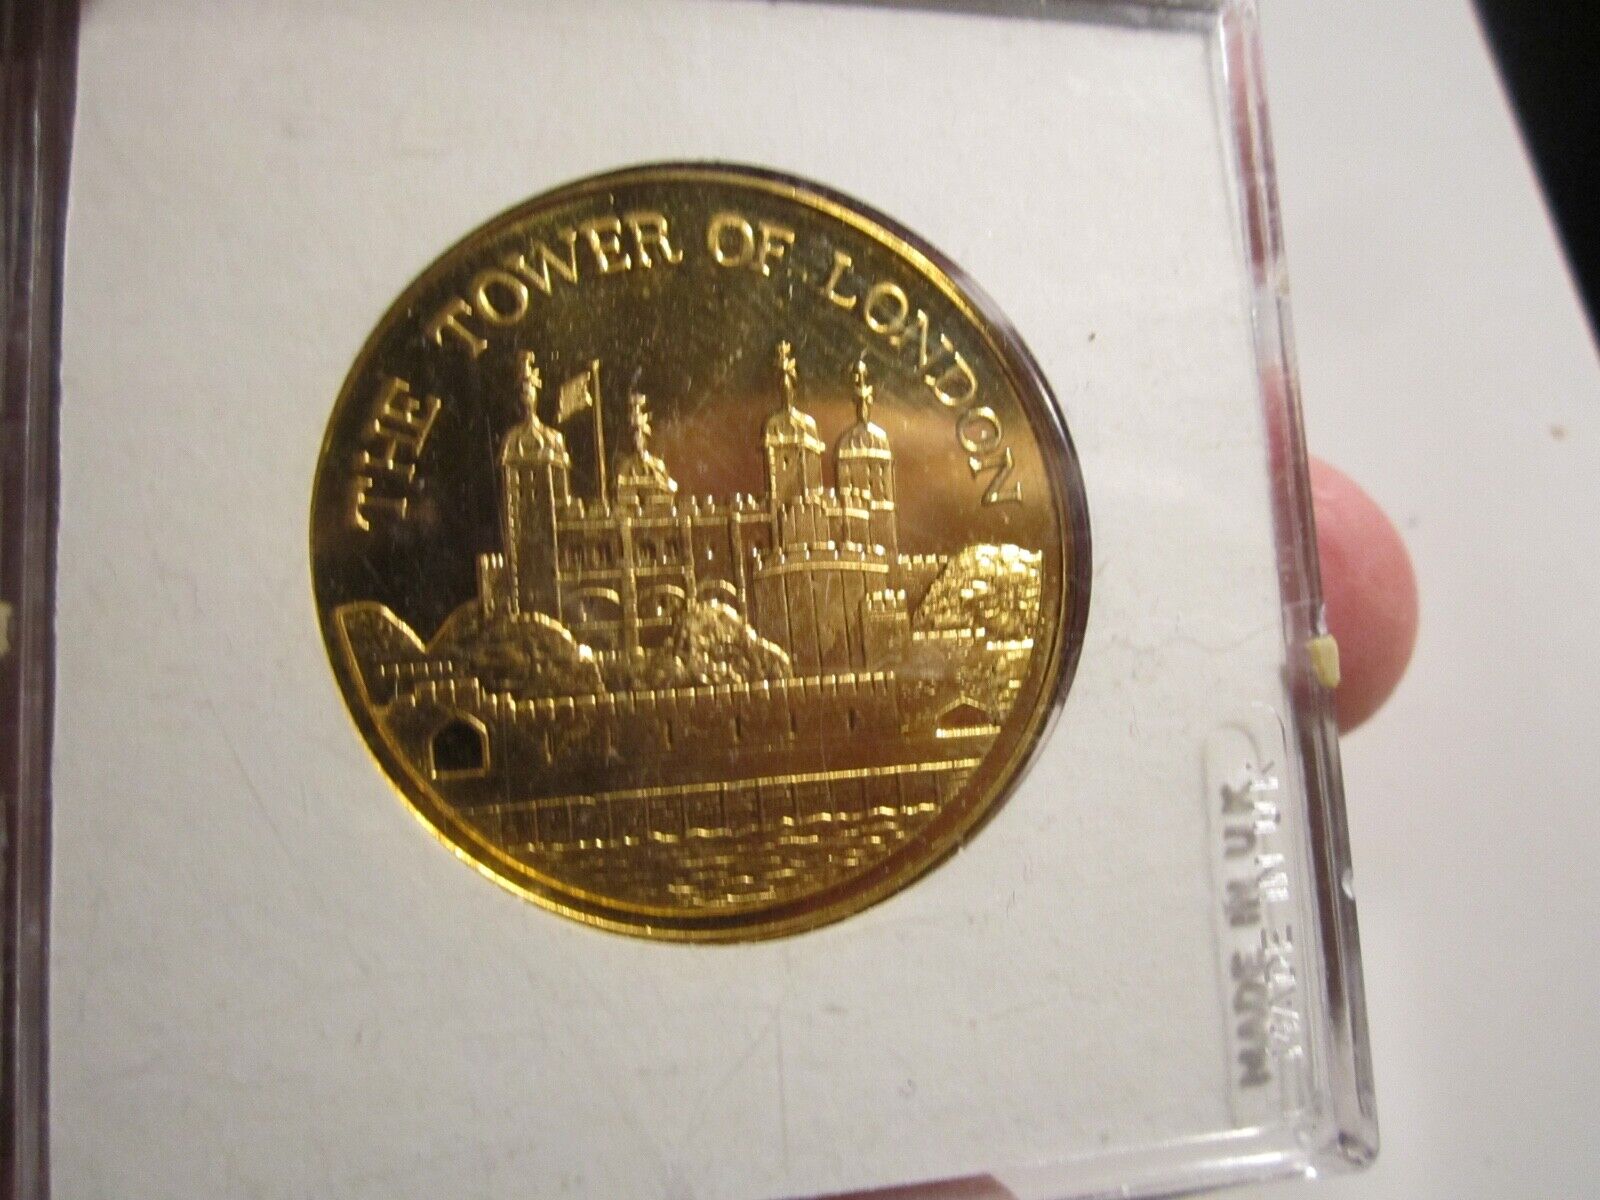 THE TOWER OF LONDON COMMEMORATIVE COIN 22K GOLD PLATED SEALED MINT BBA